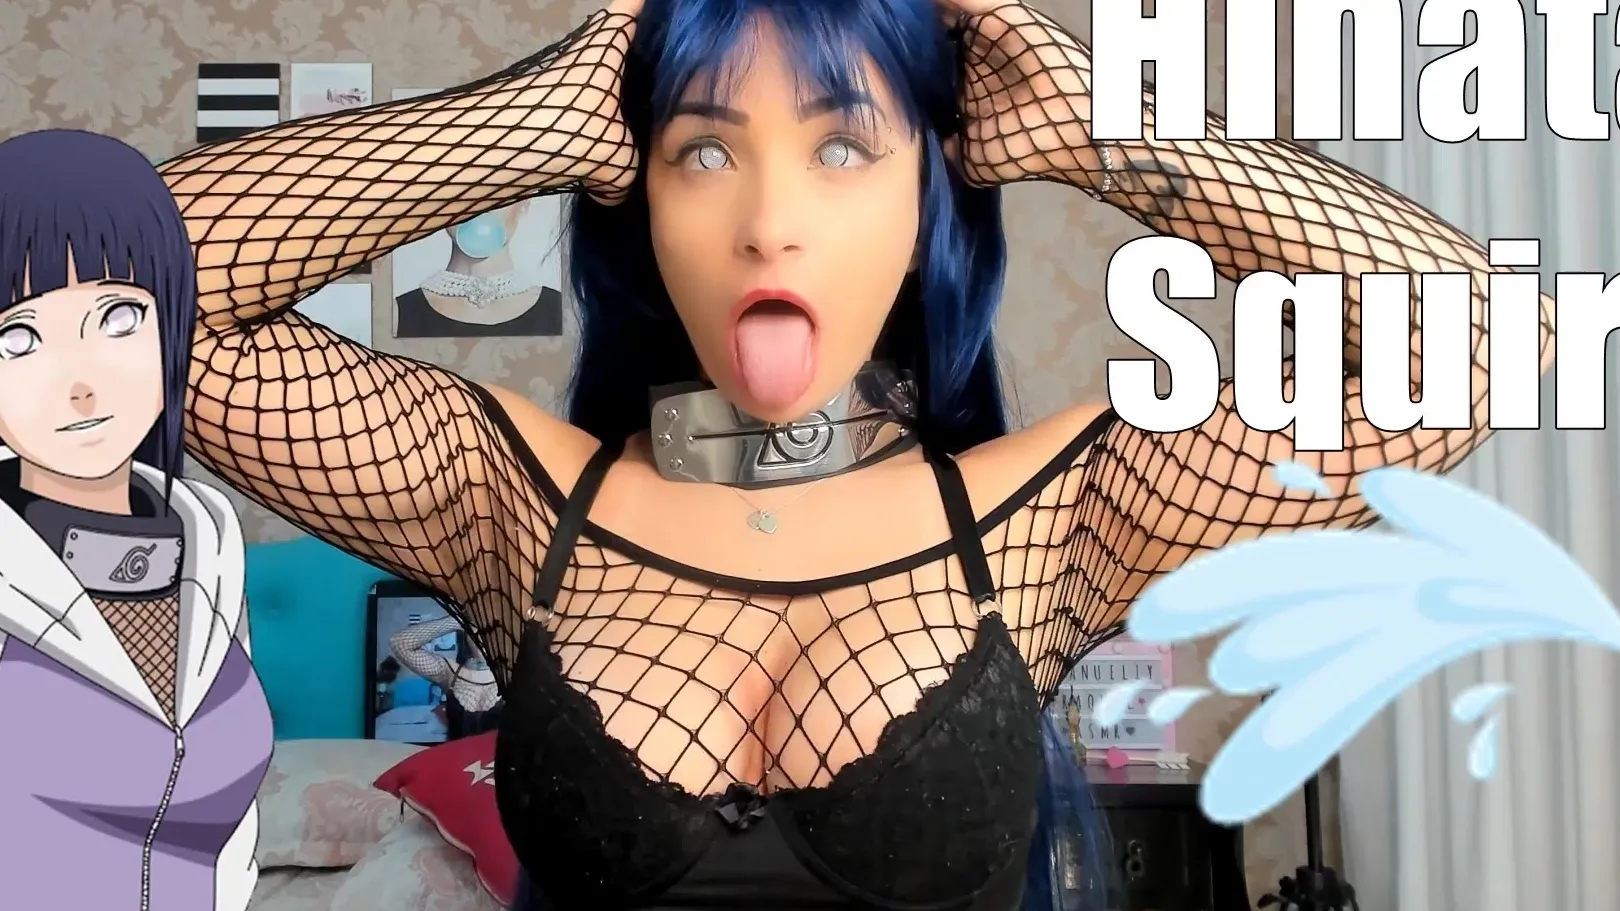 Amatuer Cosplay Nerd - Hot Hinata cosplay with squirt - Solo Amateur Porn